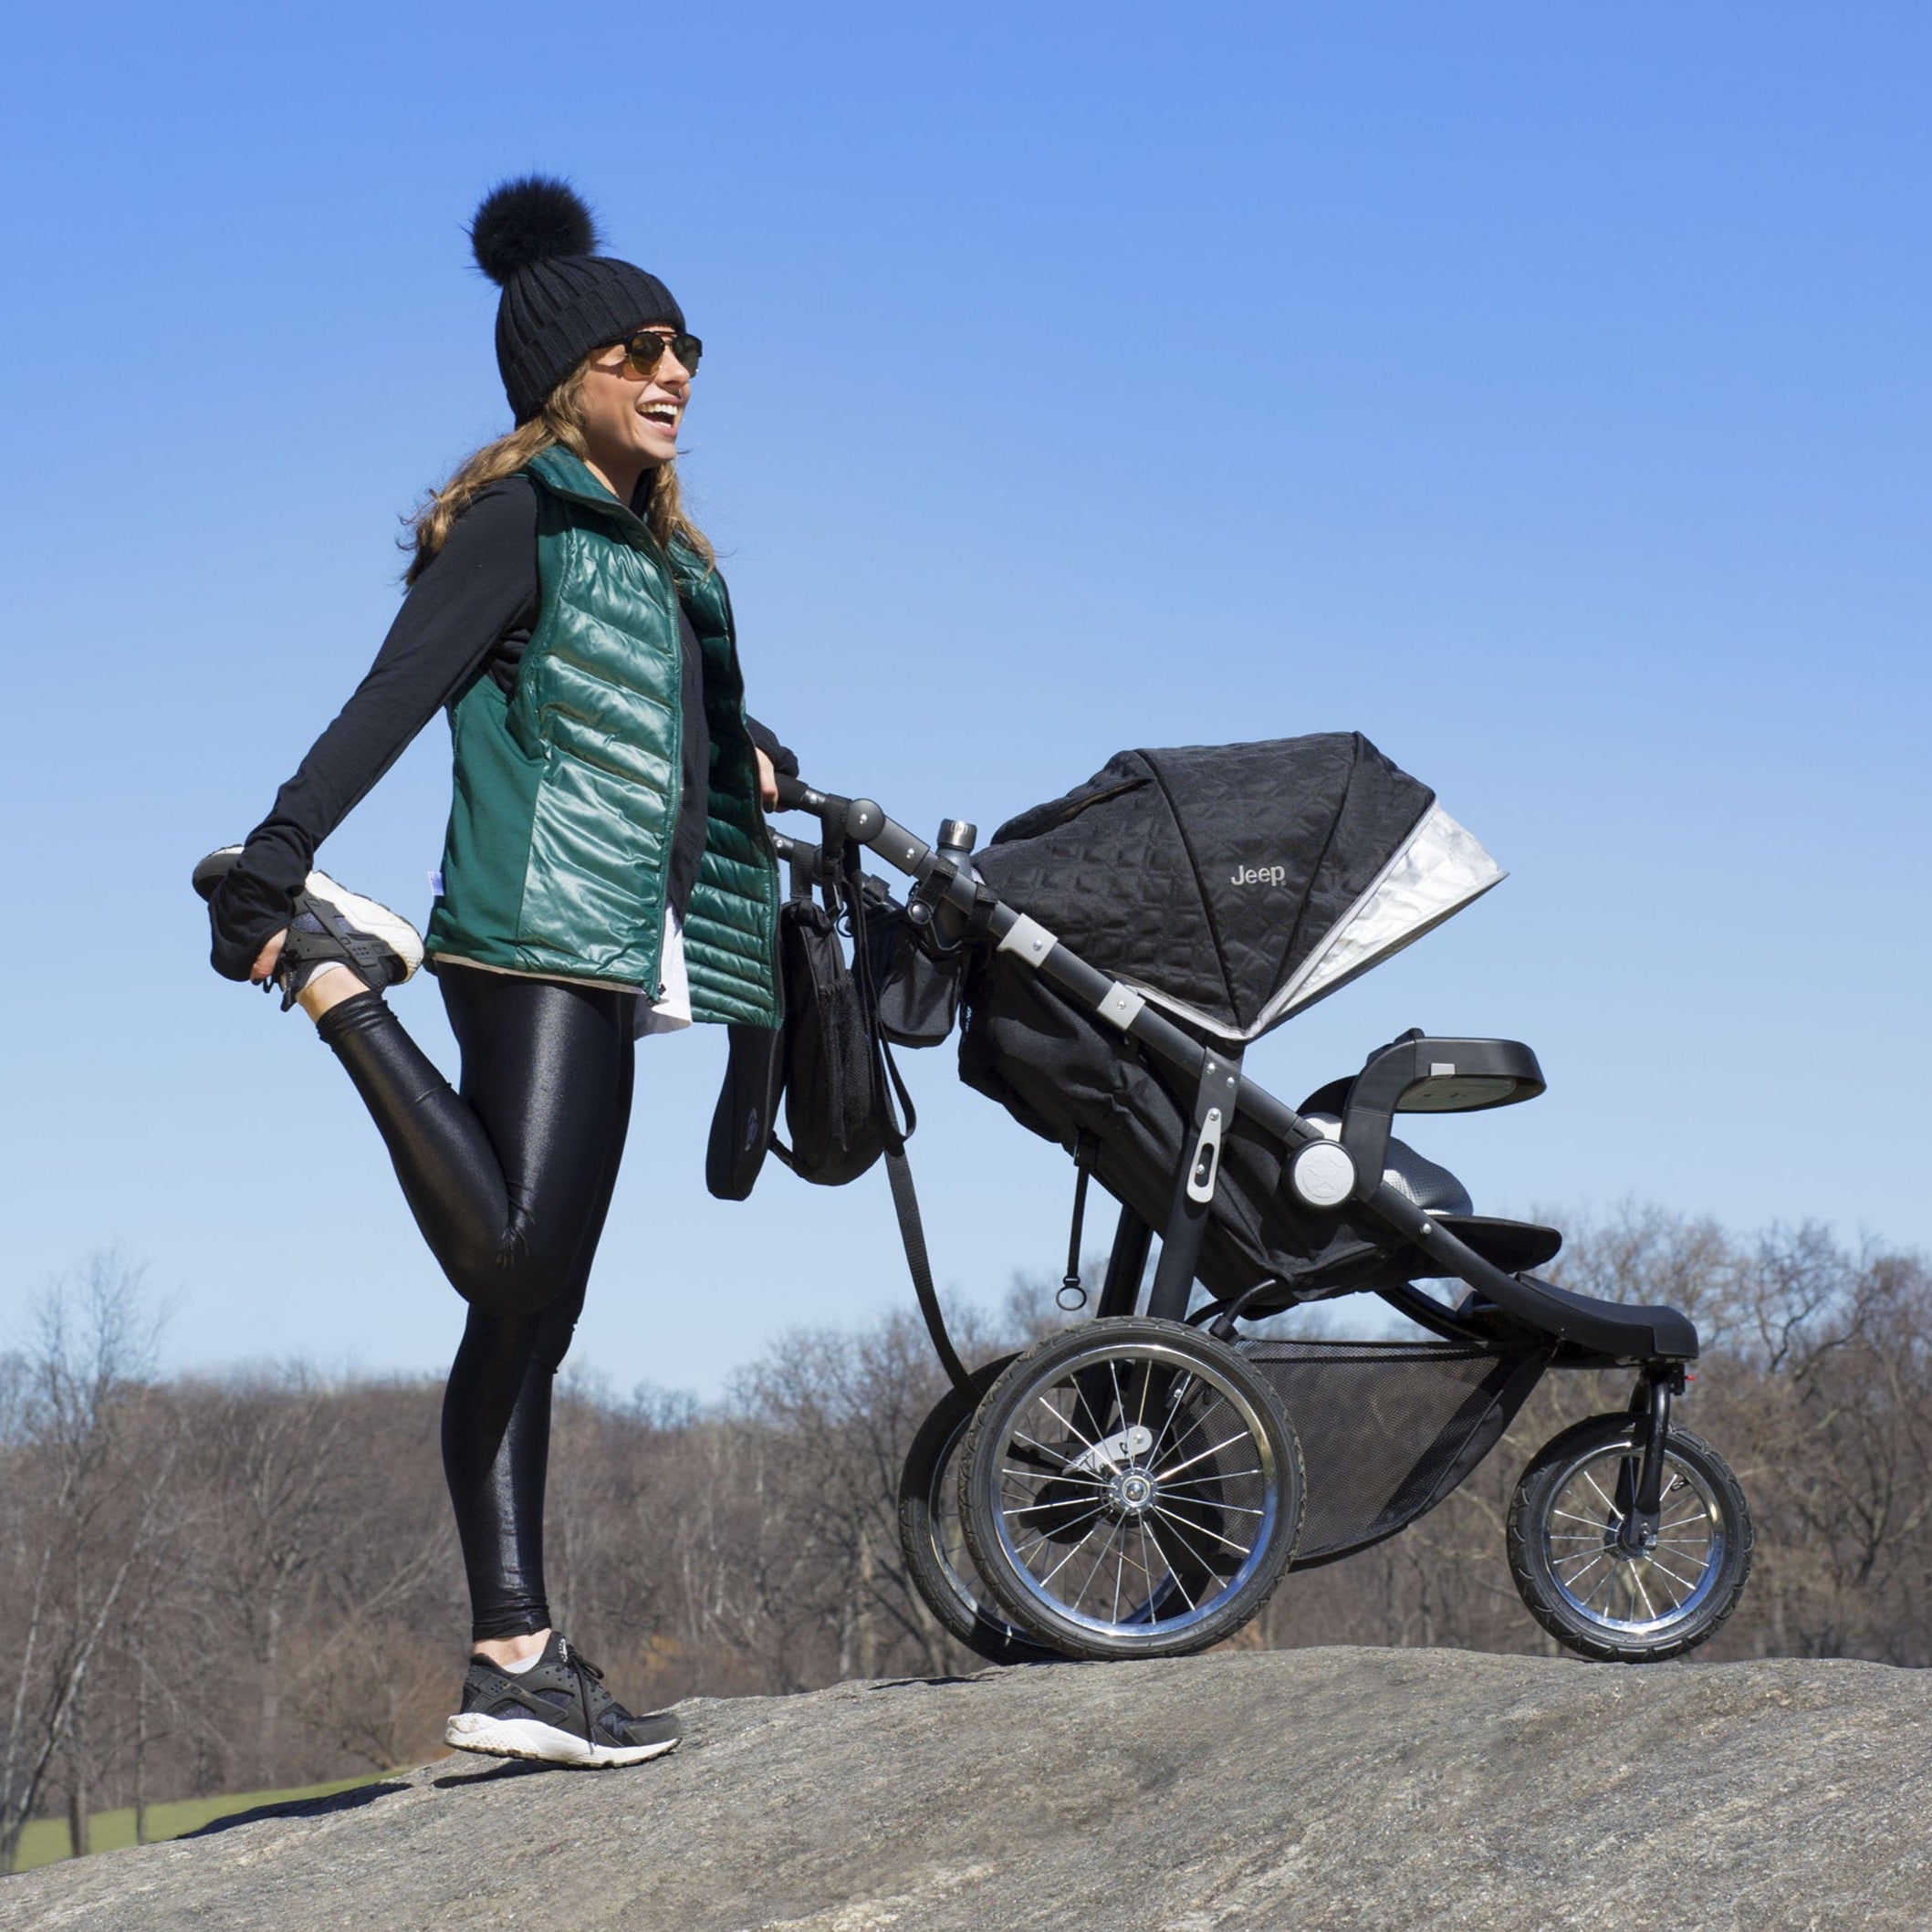 jeep cross country stroller